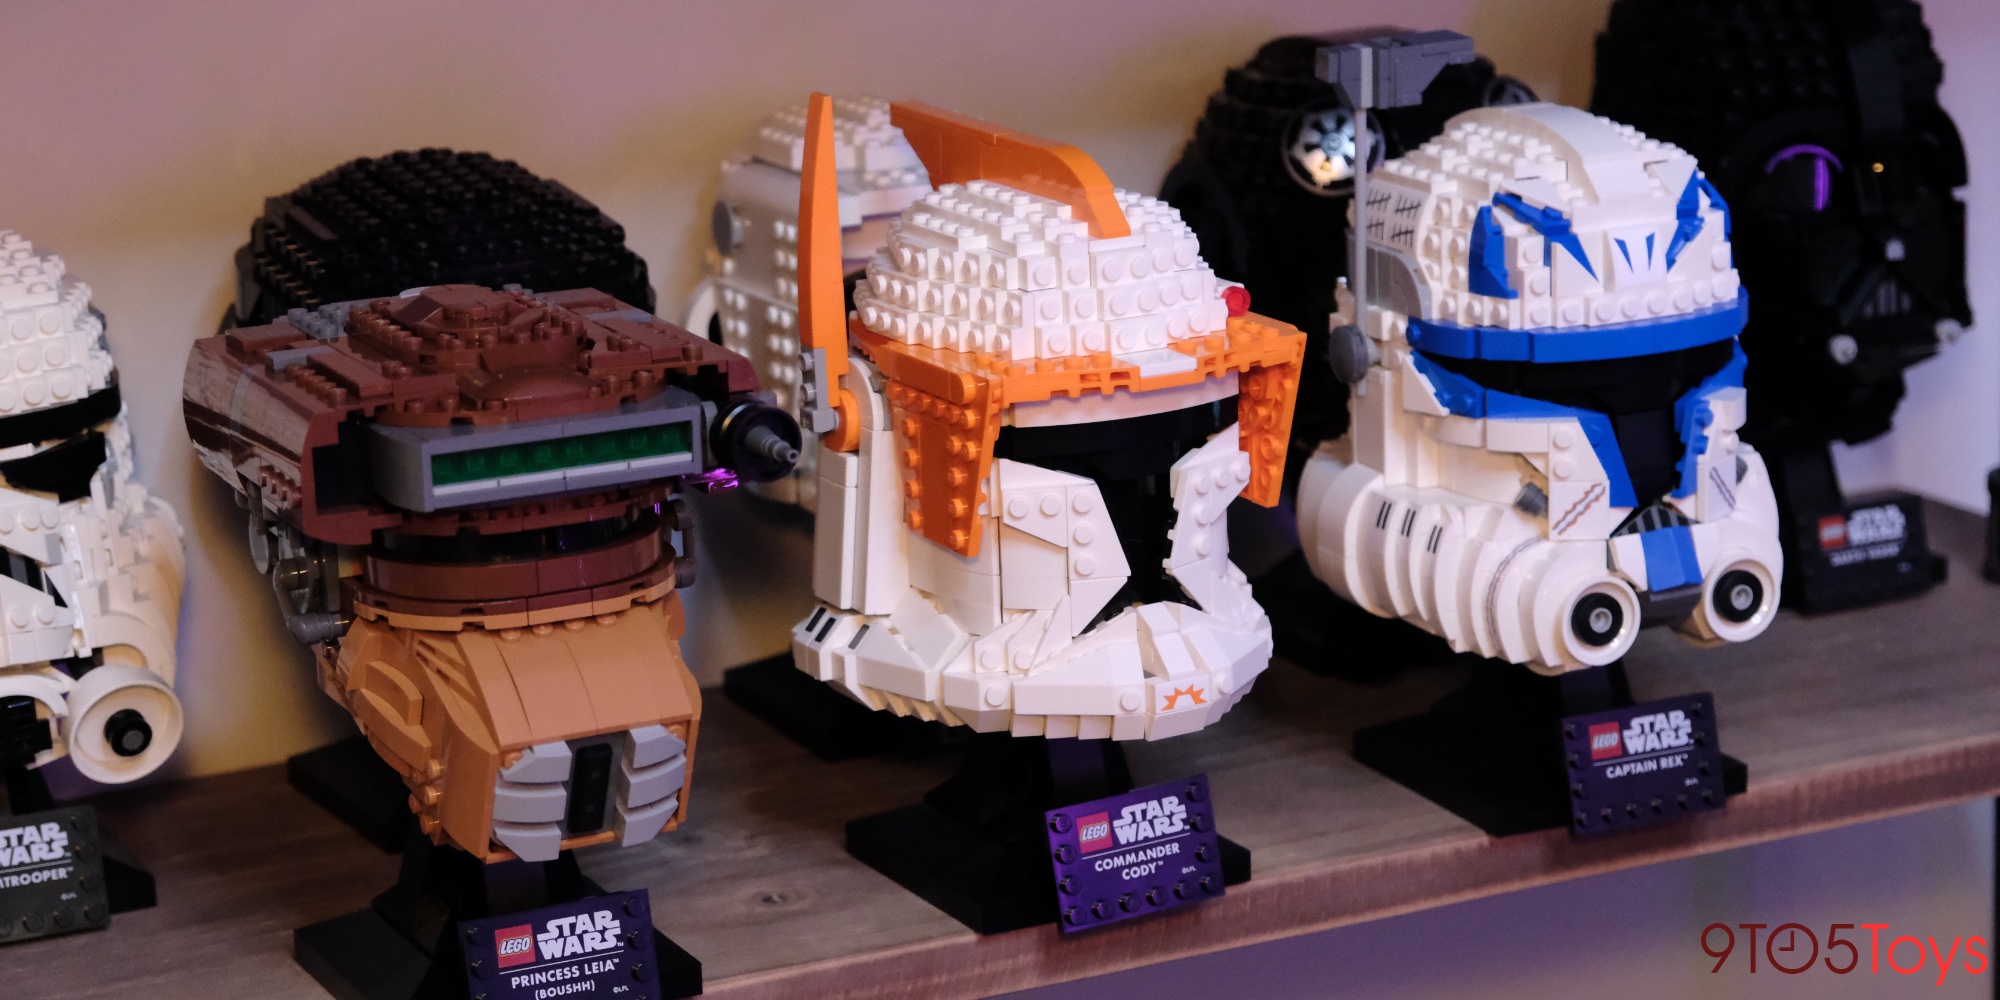 Lego stormtrooper helmets got worse IMO, the new one (right one